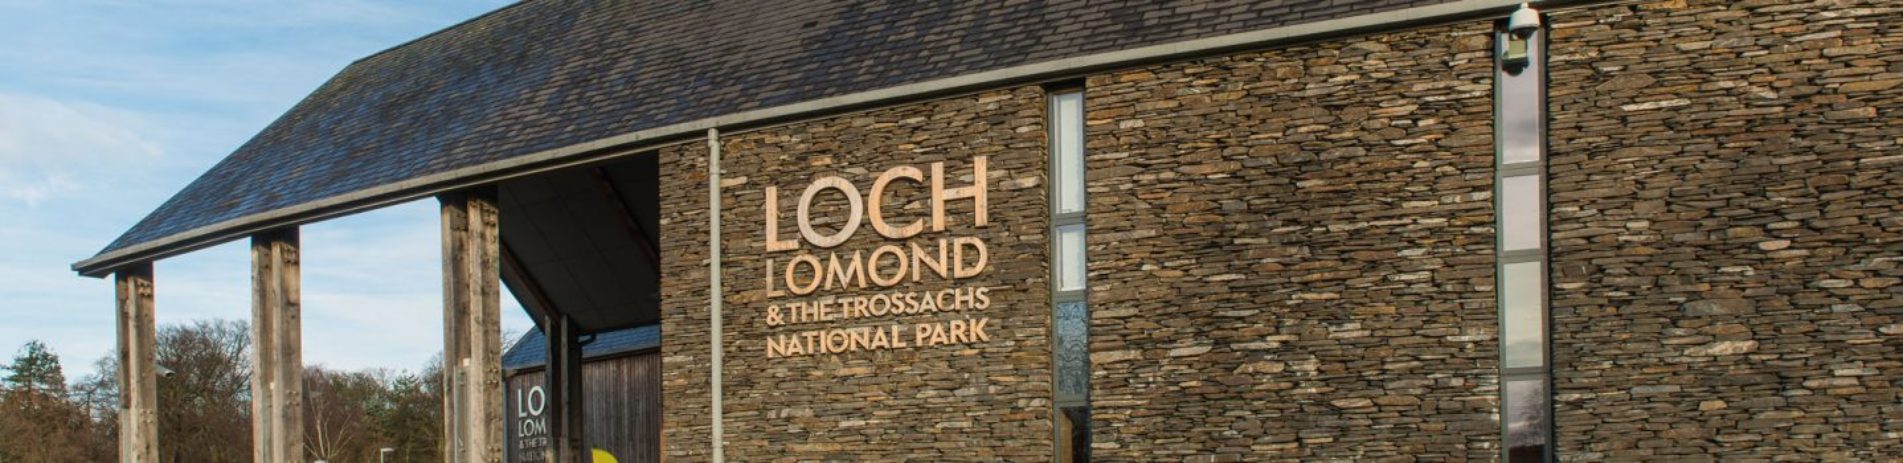 loch-lomond-and-the-trossachs-national-park-authority-headquarters-building-with-logo-large-and-prominent-above-main-entrance